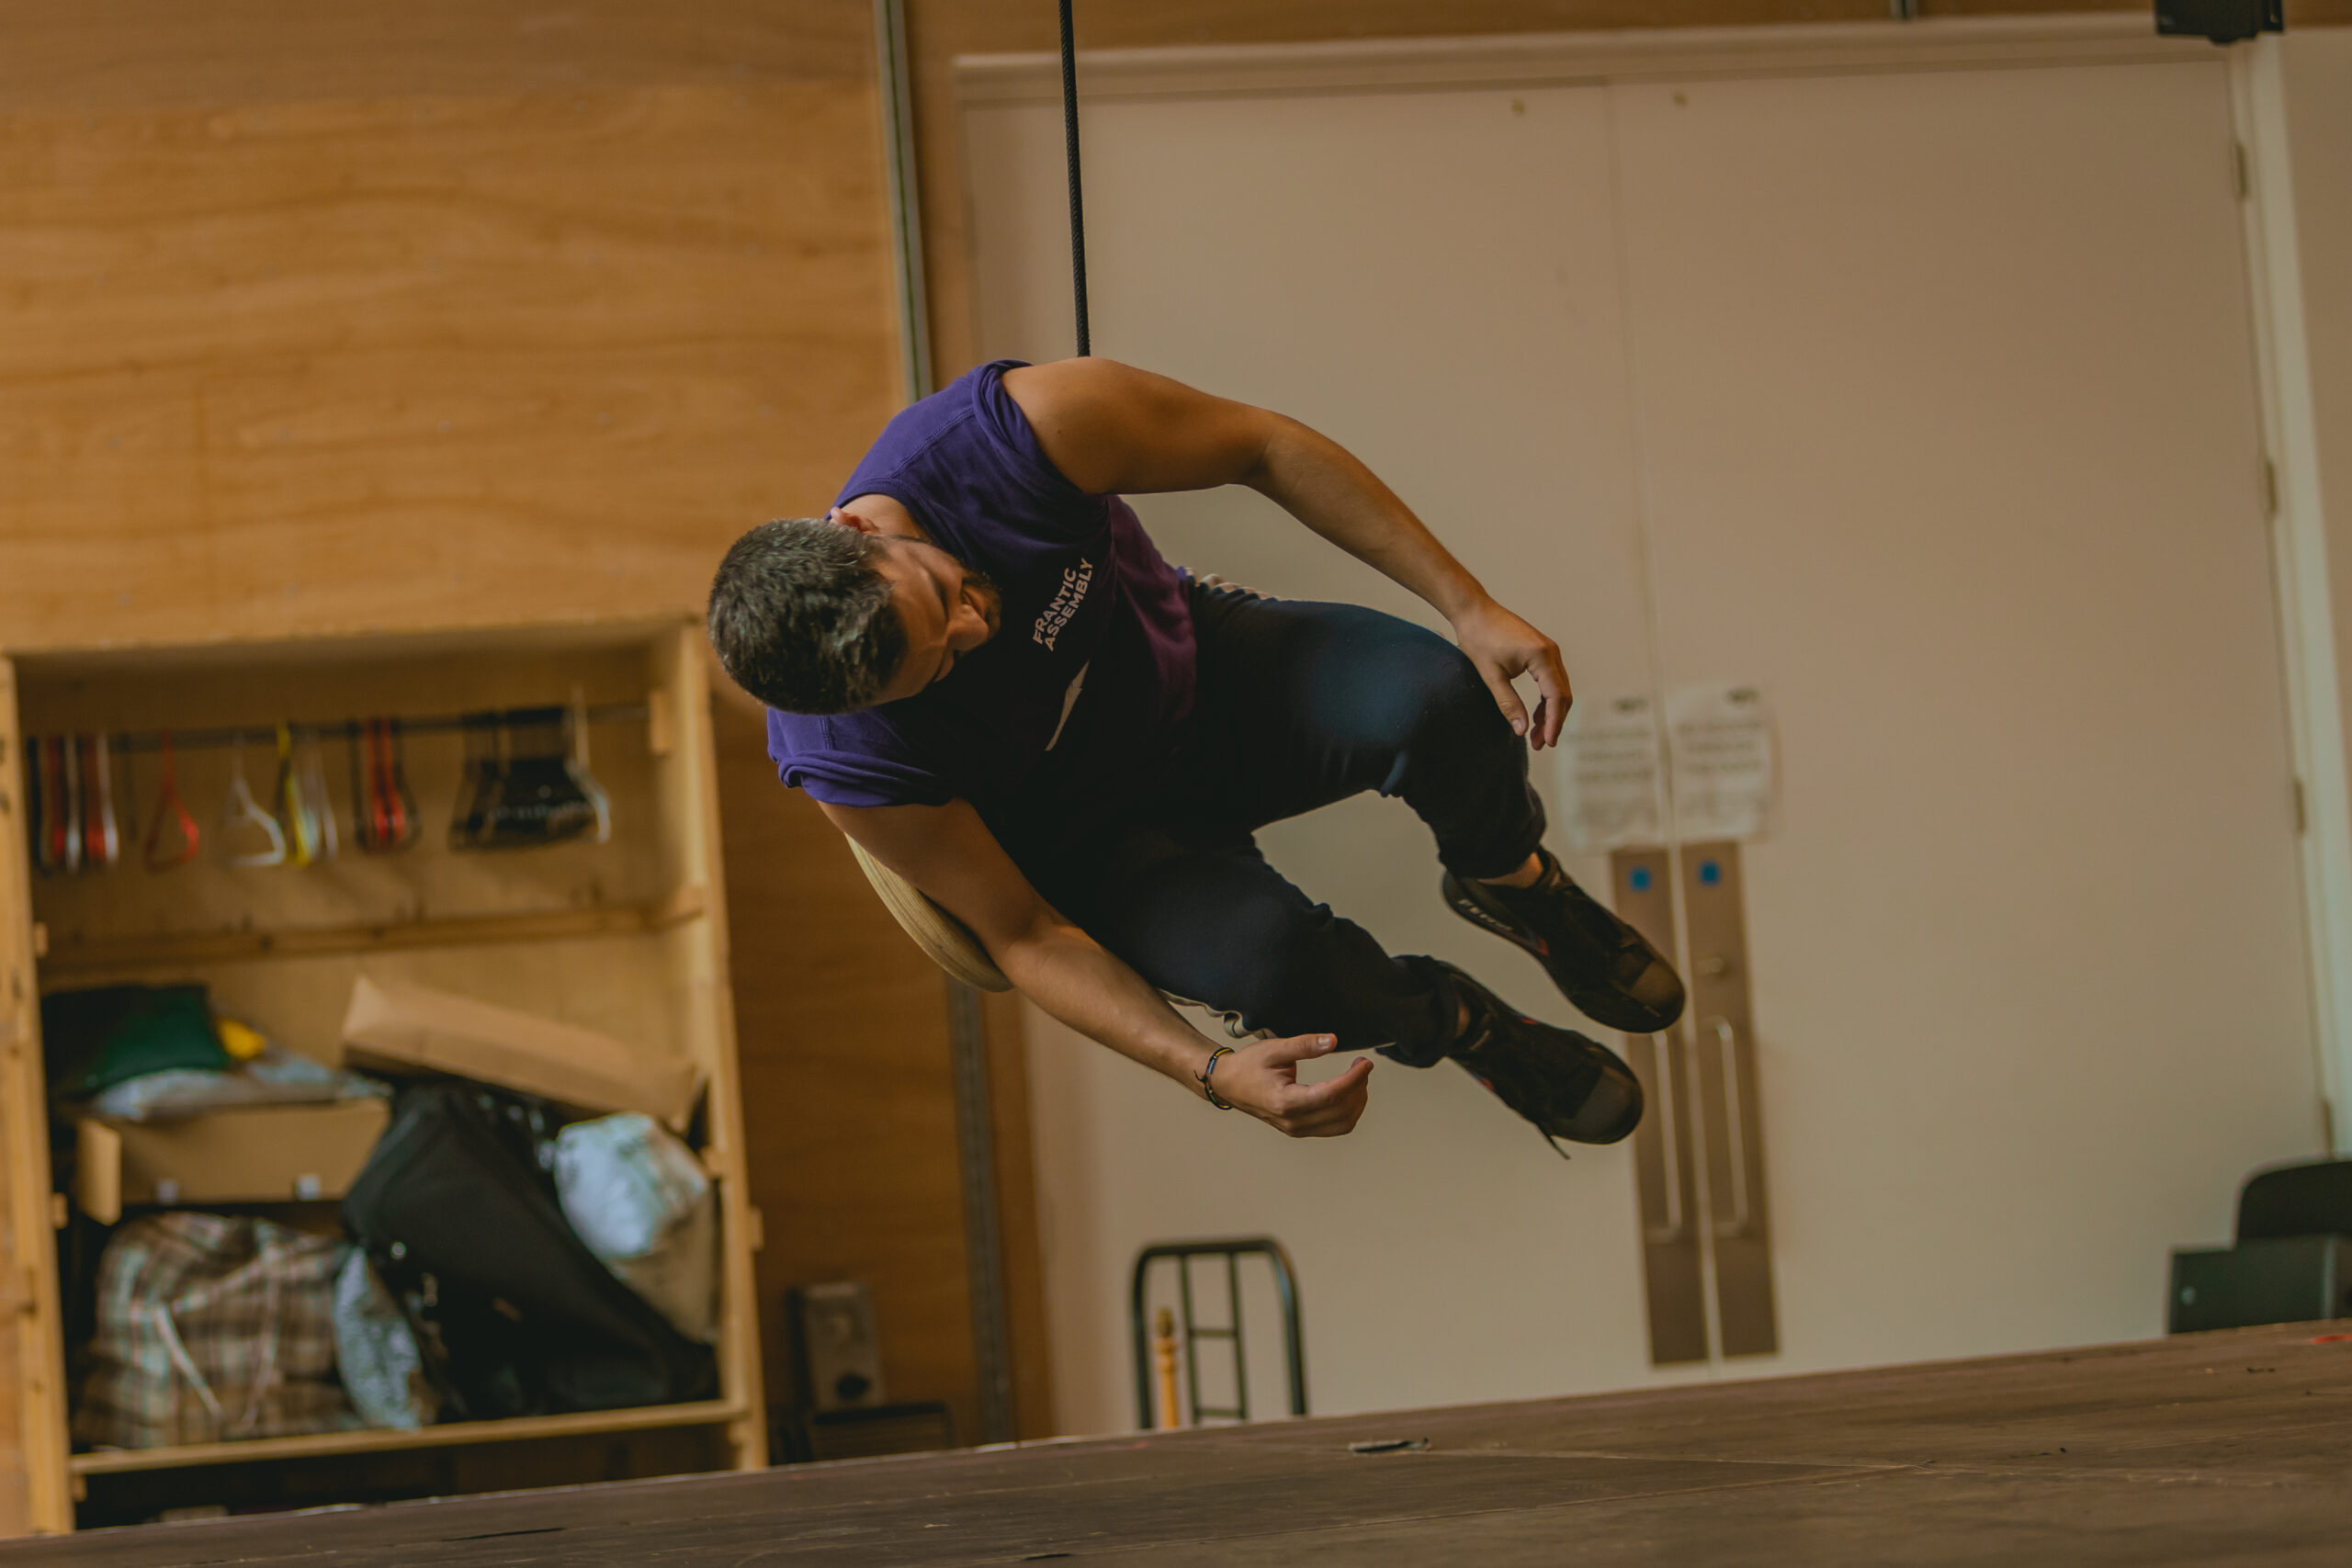 In a wood-cladded rehearsal room, Felipe Pacheco (Gregor) is swinging in the air facing the ground, with the rope swing wrapped around his torso.